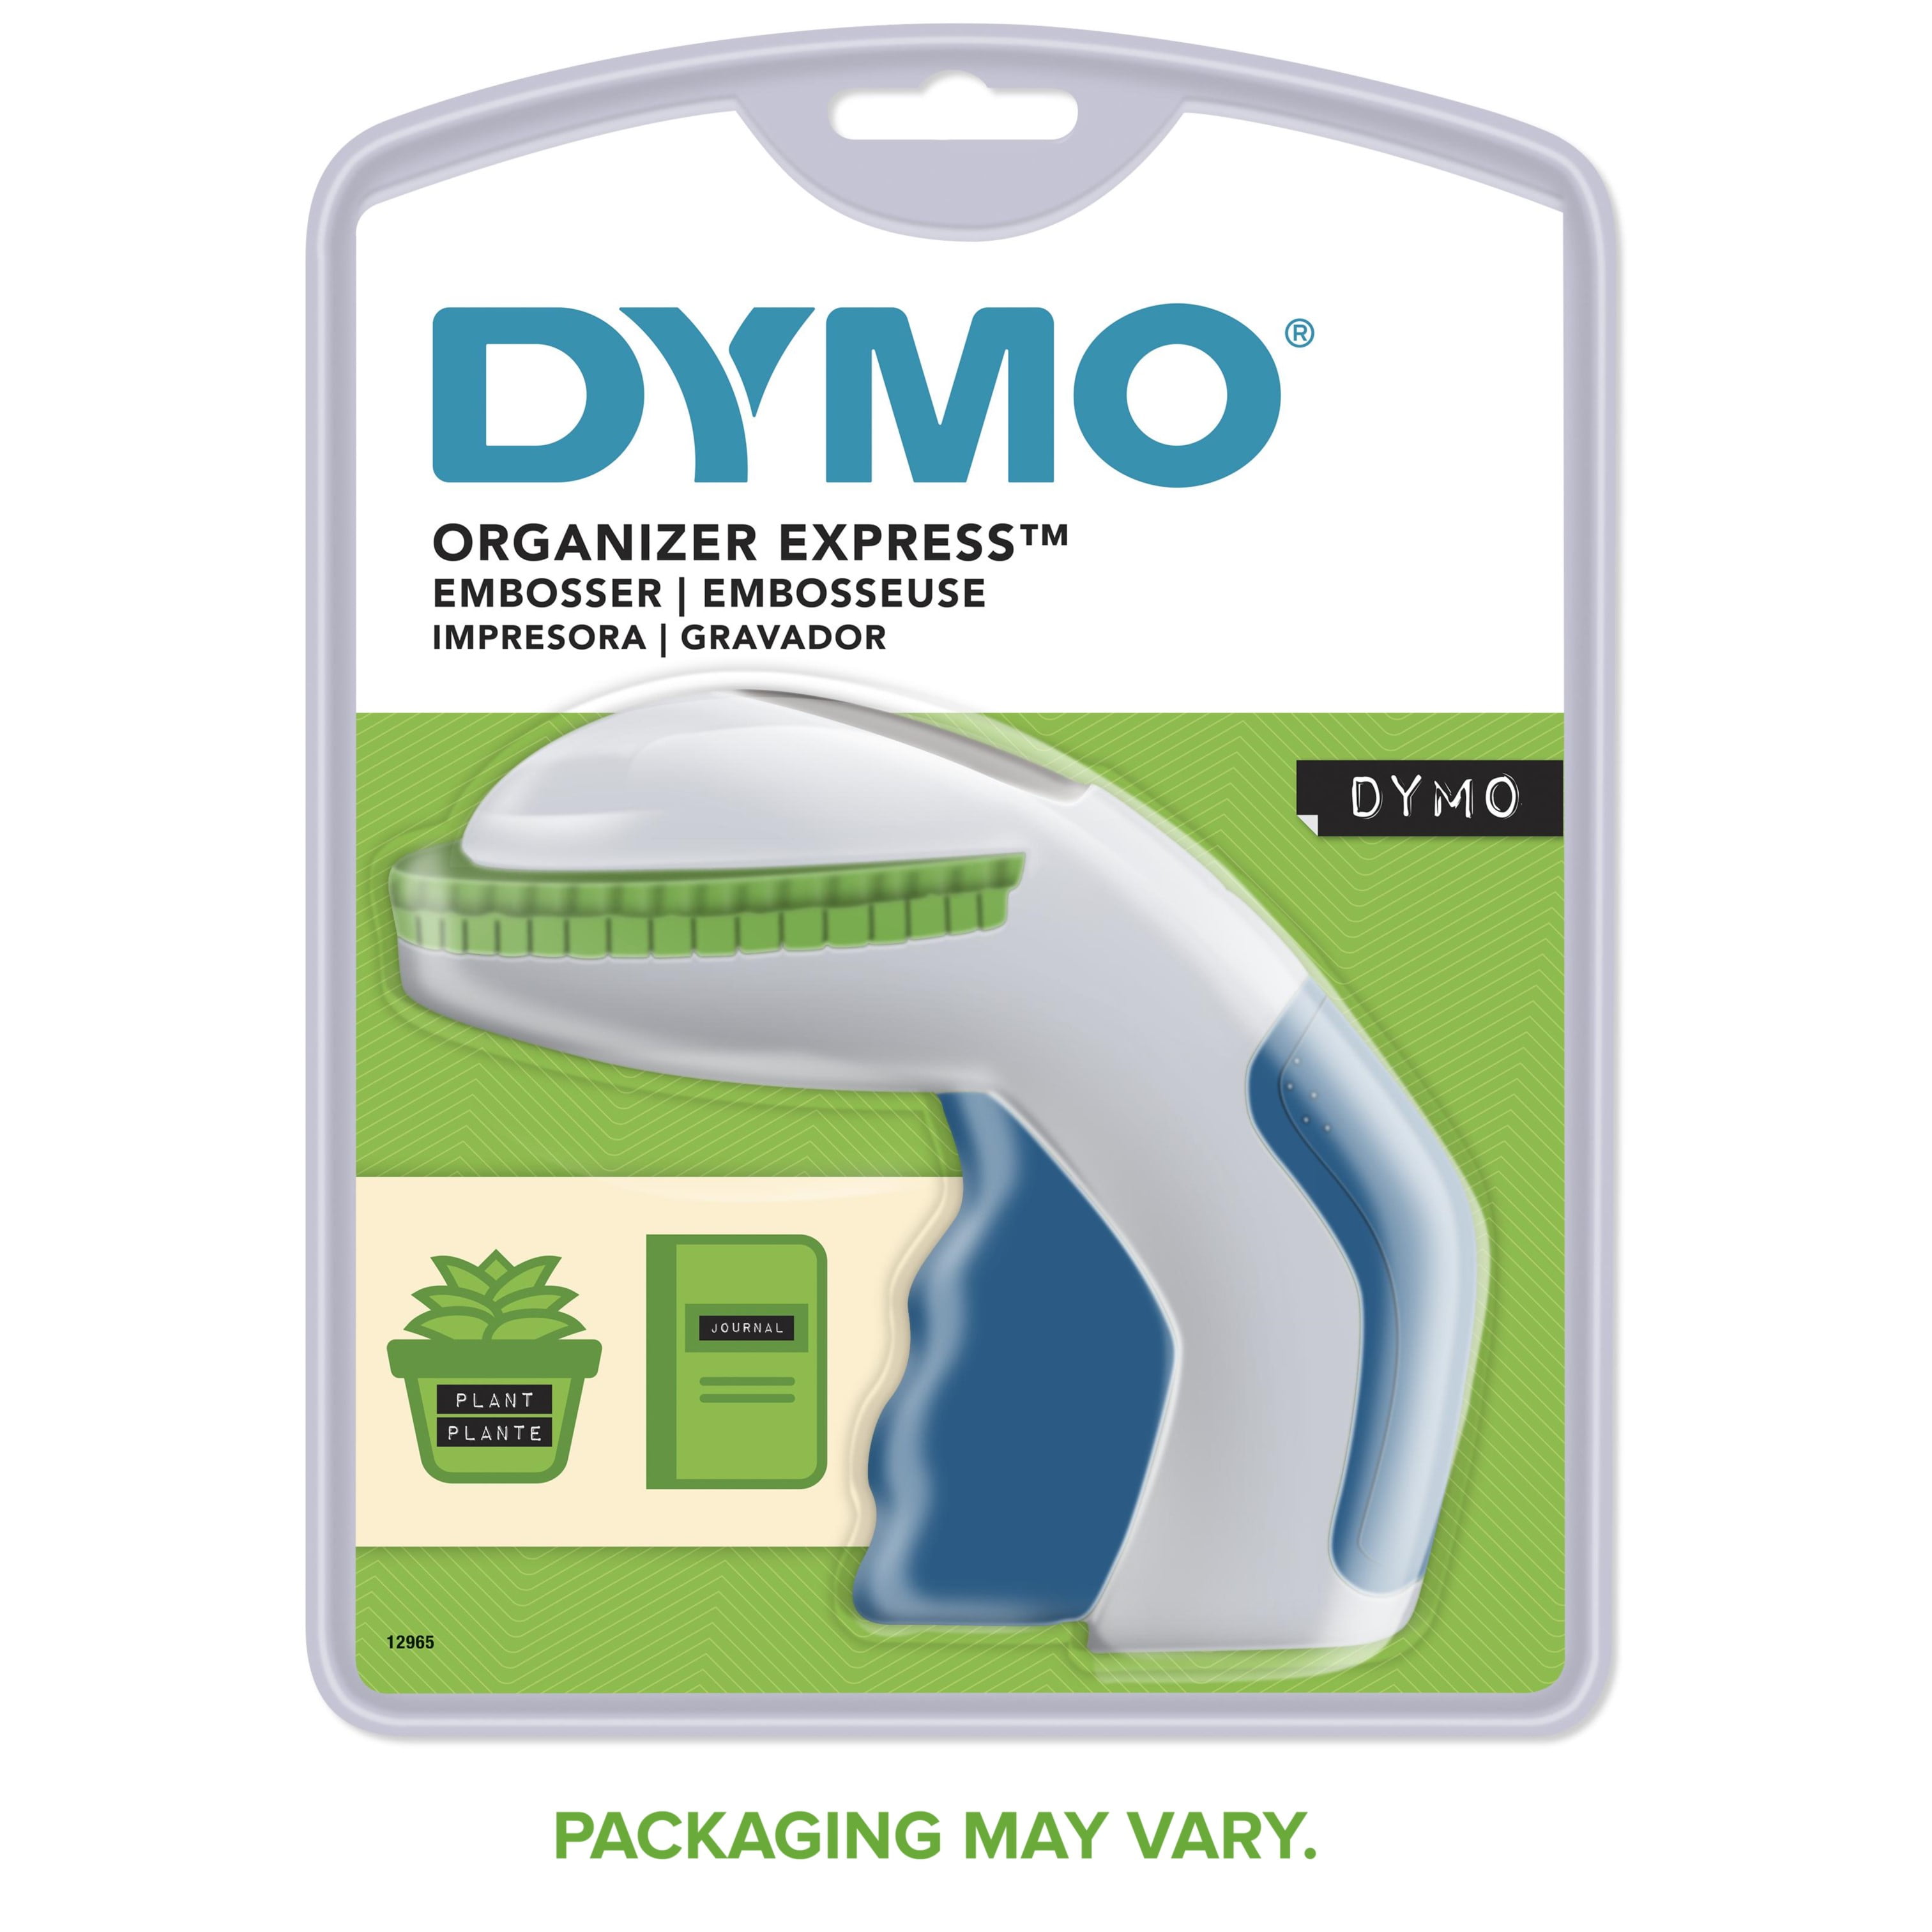 Details about   DYMO Organizer Xpress Handheld Embossing Label Maker 12965 